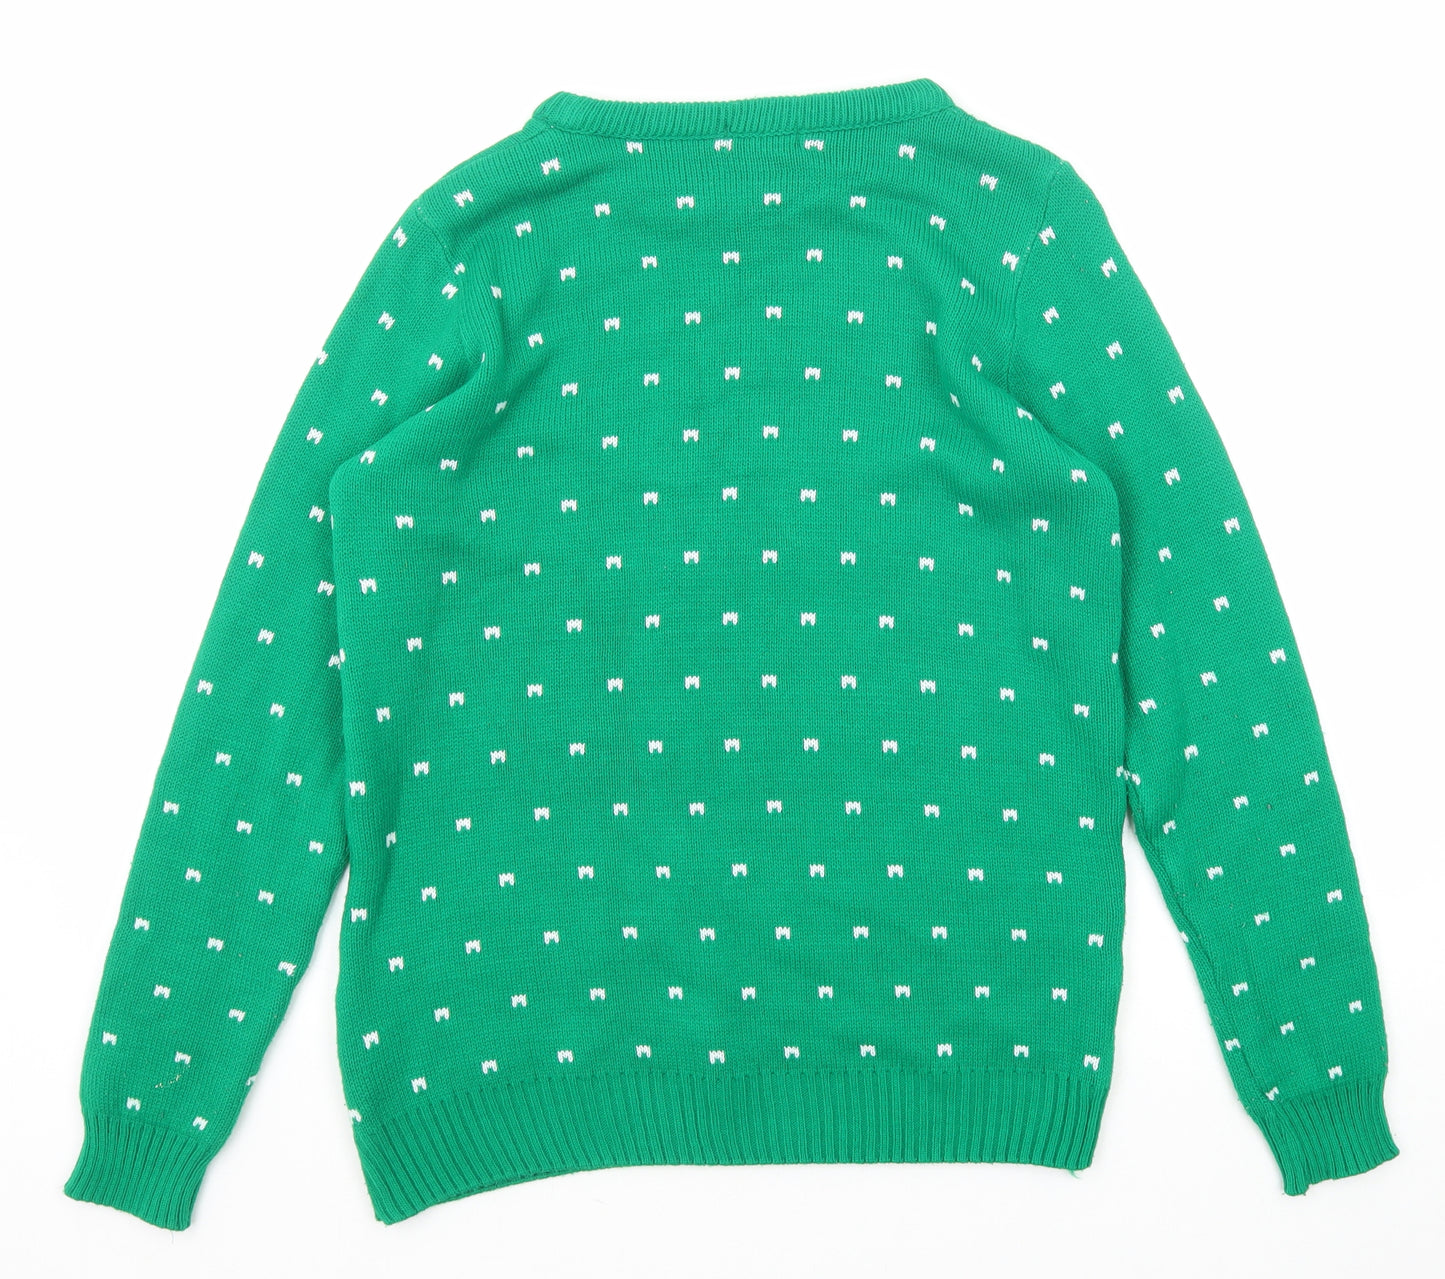 Boohoo Mens Green Round Neck Geometric Acrylic Pullover Jumper Size S Long Sleeve - Christmas Penguin